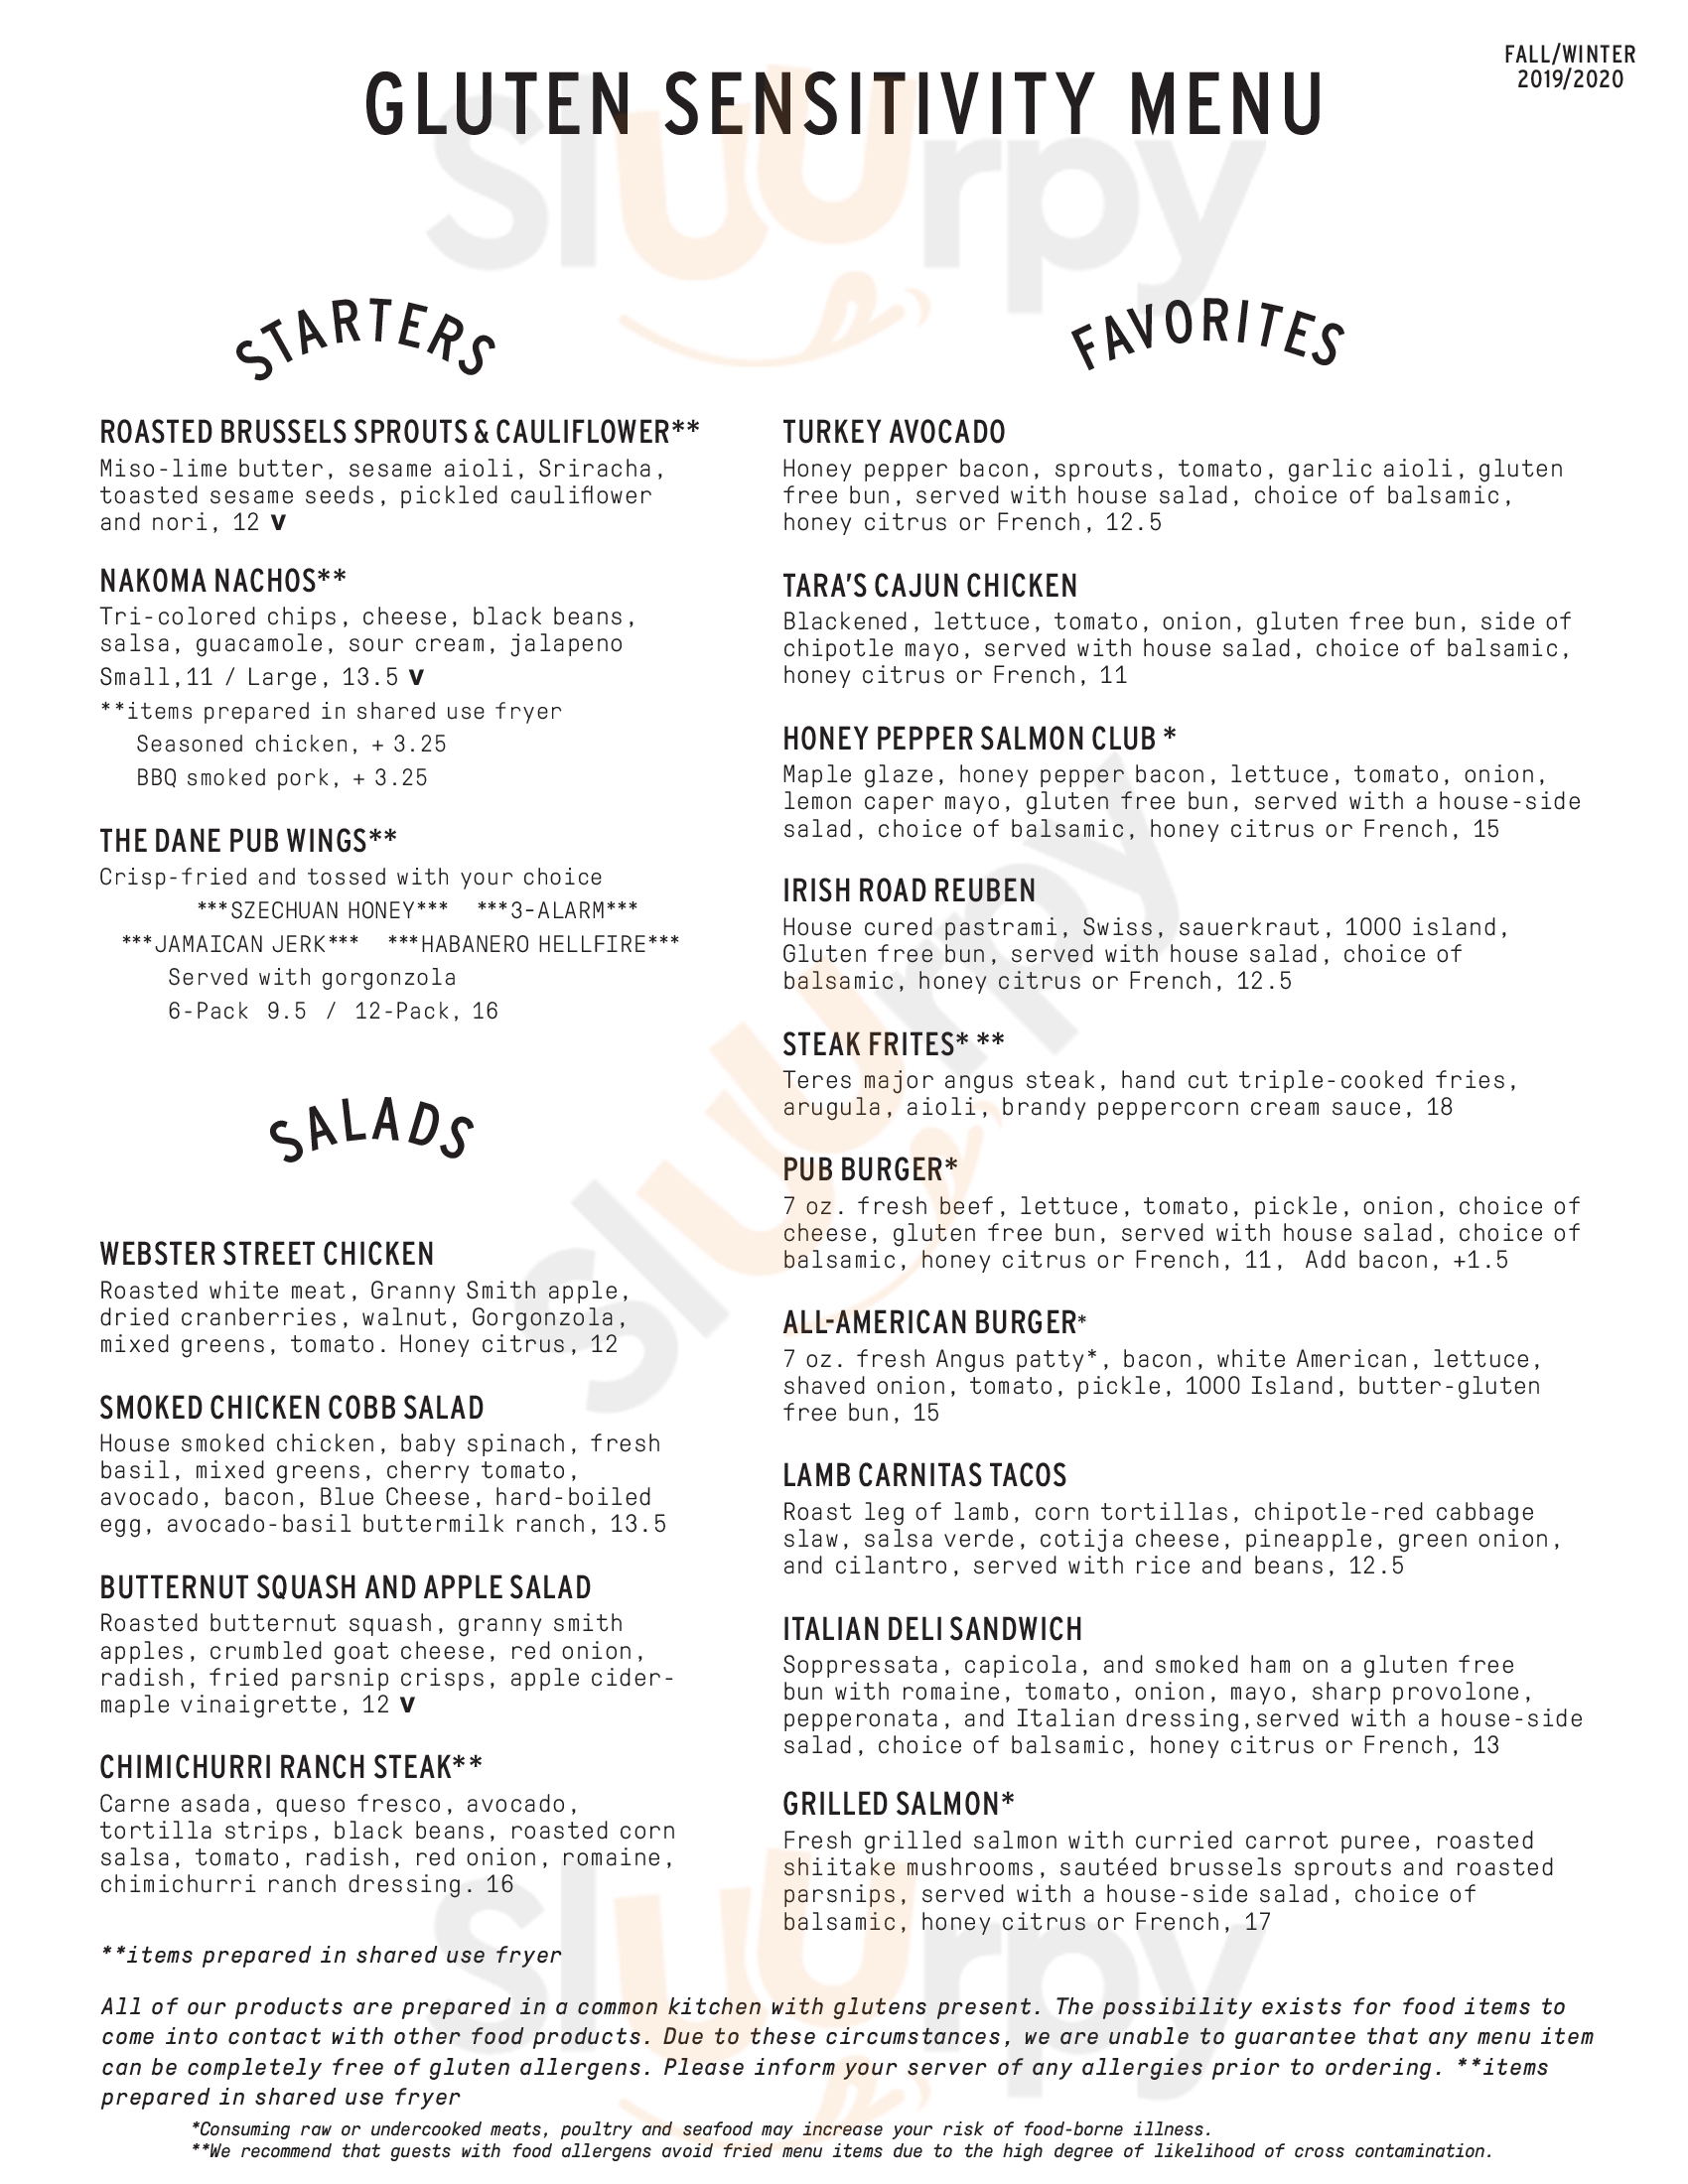 The Great Dane Pub And Brewing Co. Madison Menu - 1